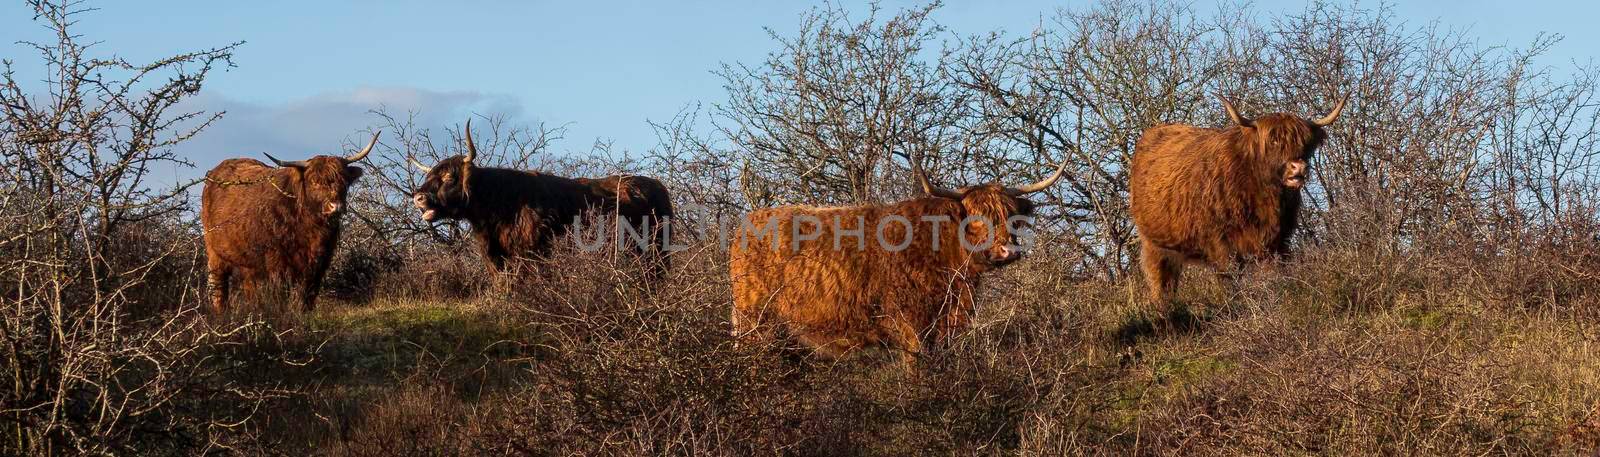 Highland cattle in the dunes in holland by compuinfoto